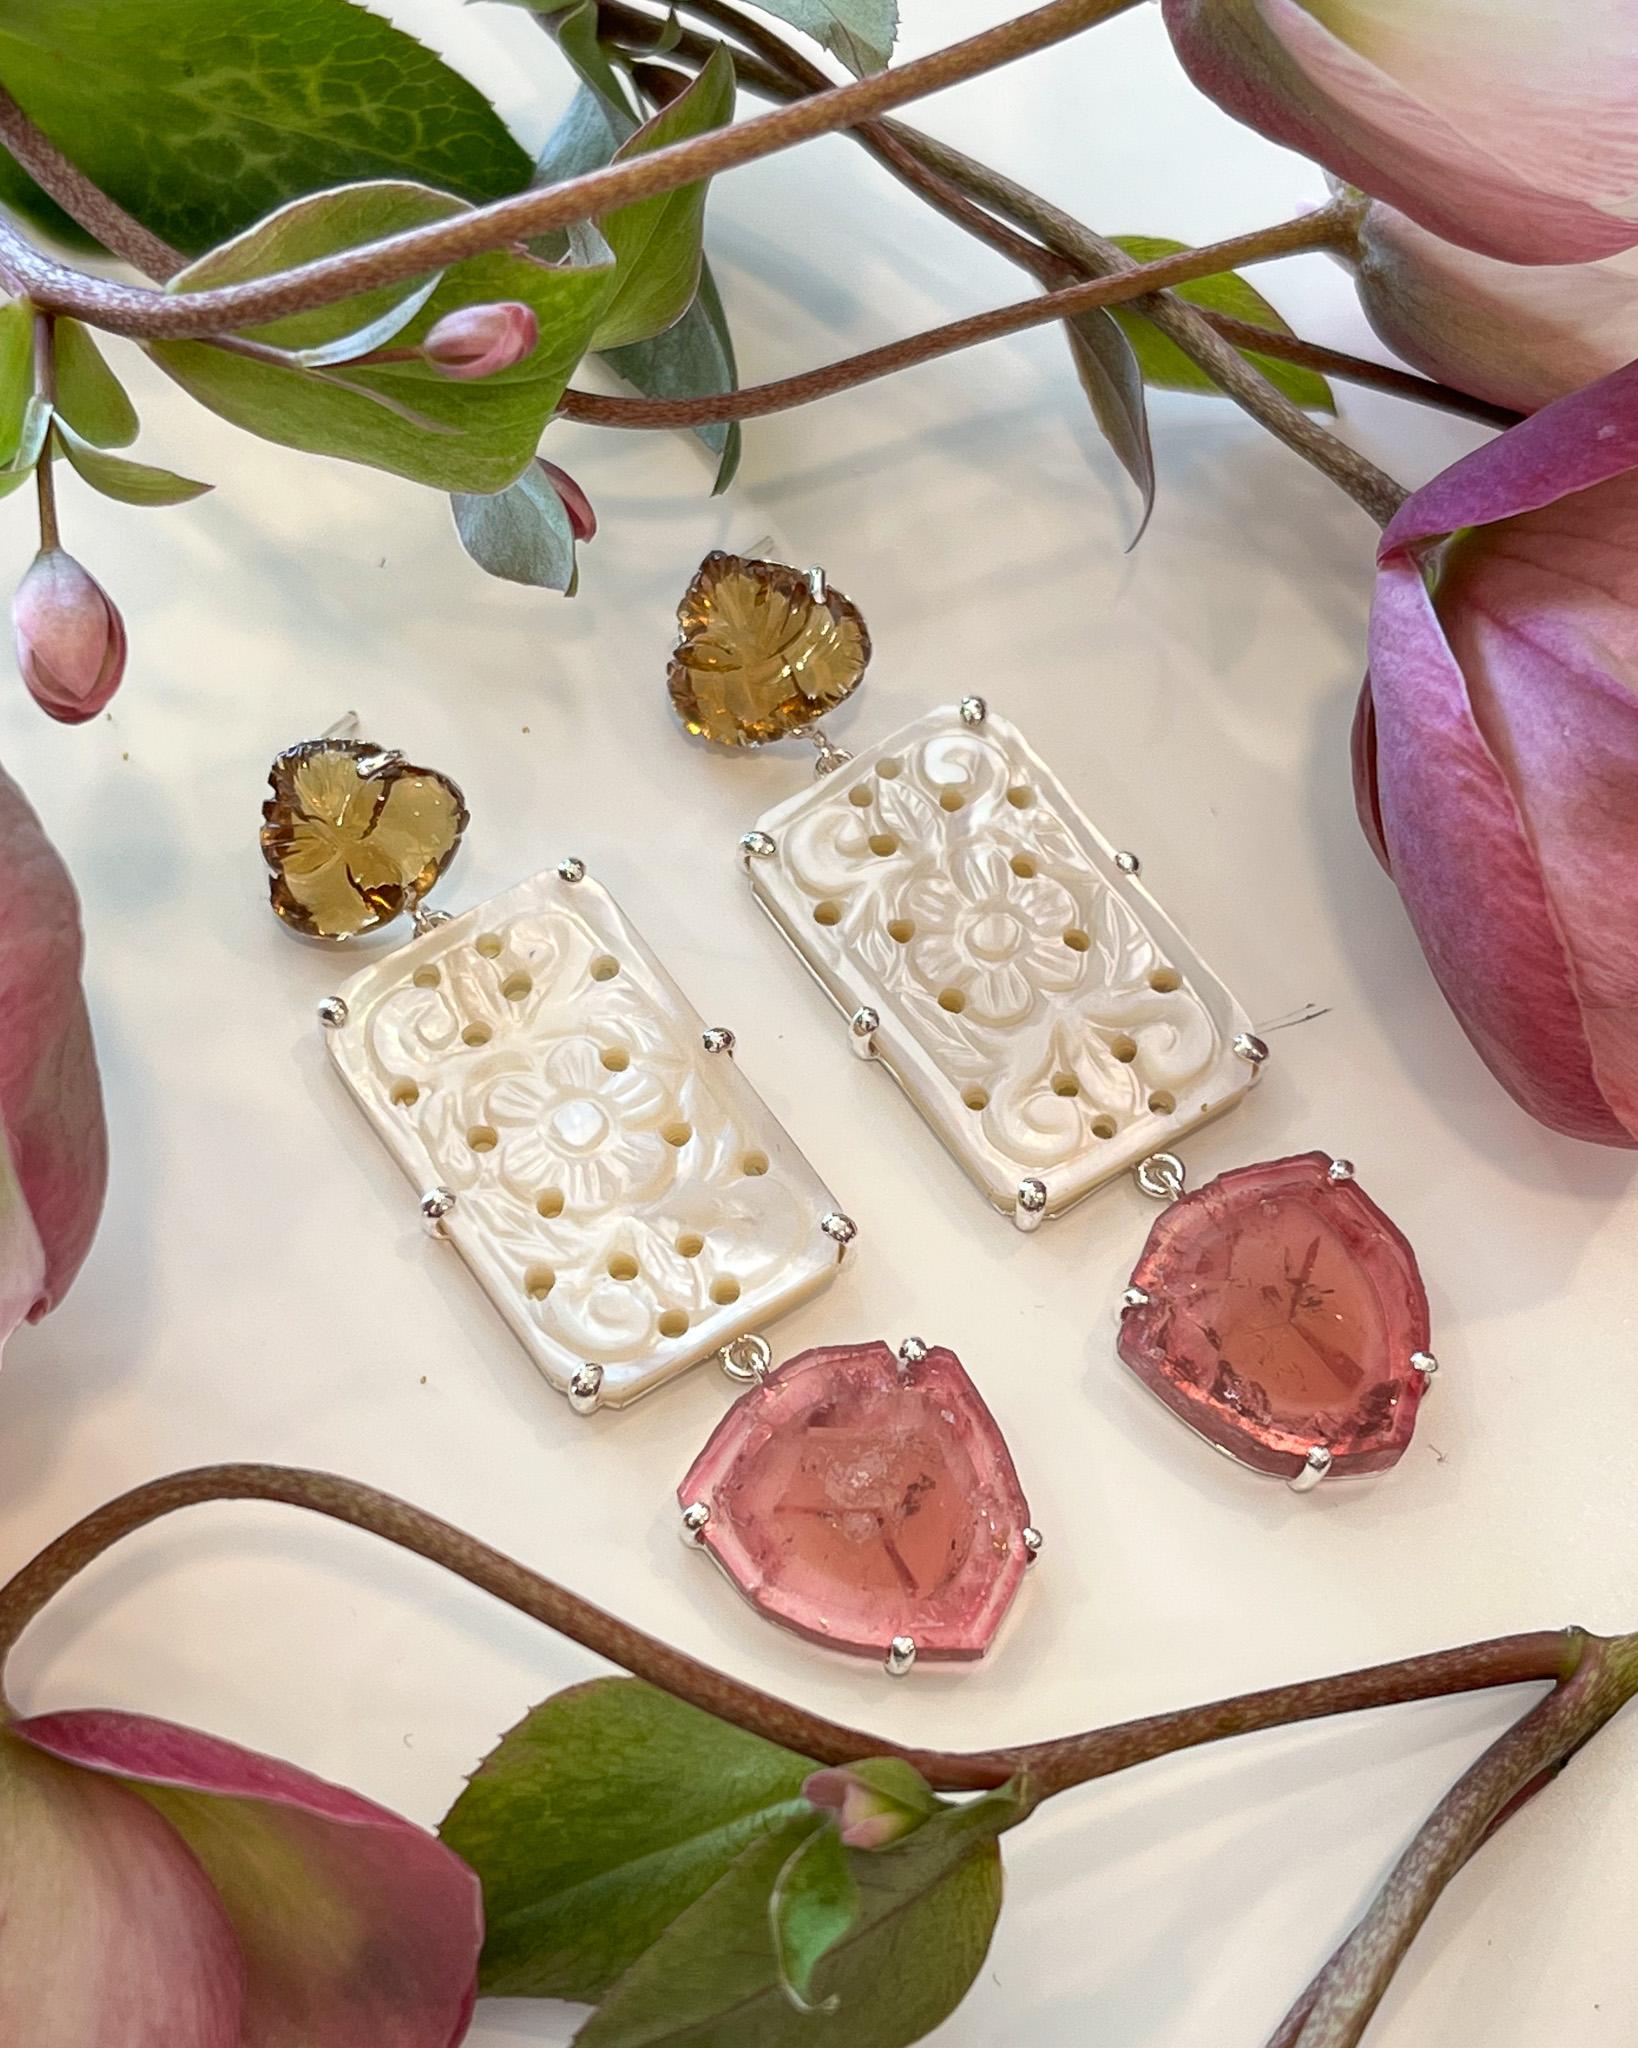 Intention: New love

Design: Big, bright and full of joy, the Rose Earrings feel like new love. The details on these are stunning: hand-cut leaf cognac quartz, large floral hand-cut mother of pearl, and slices of translucent, juicy pink tourmaline.